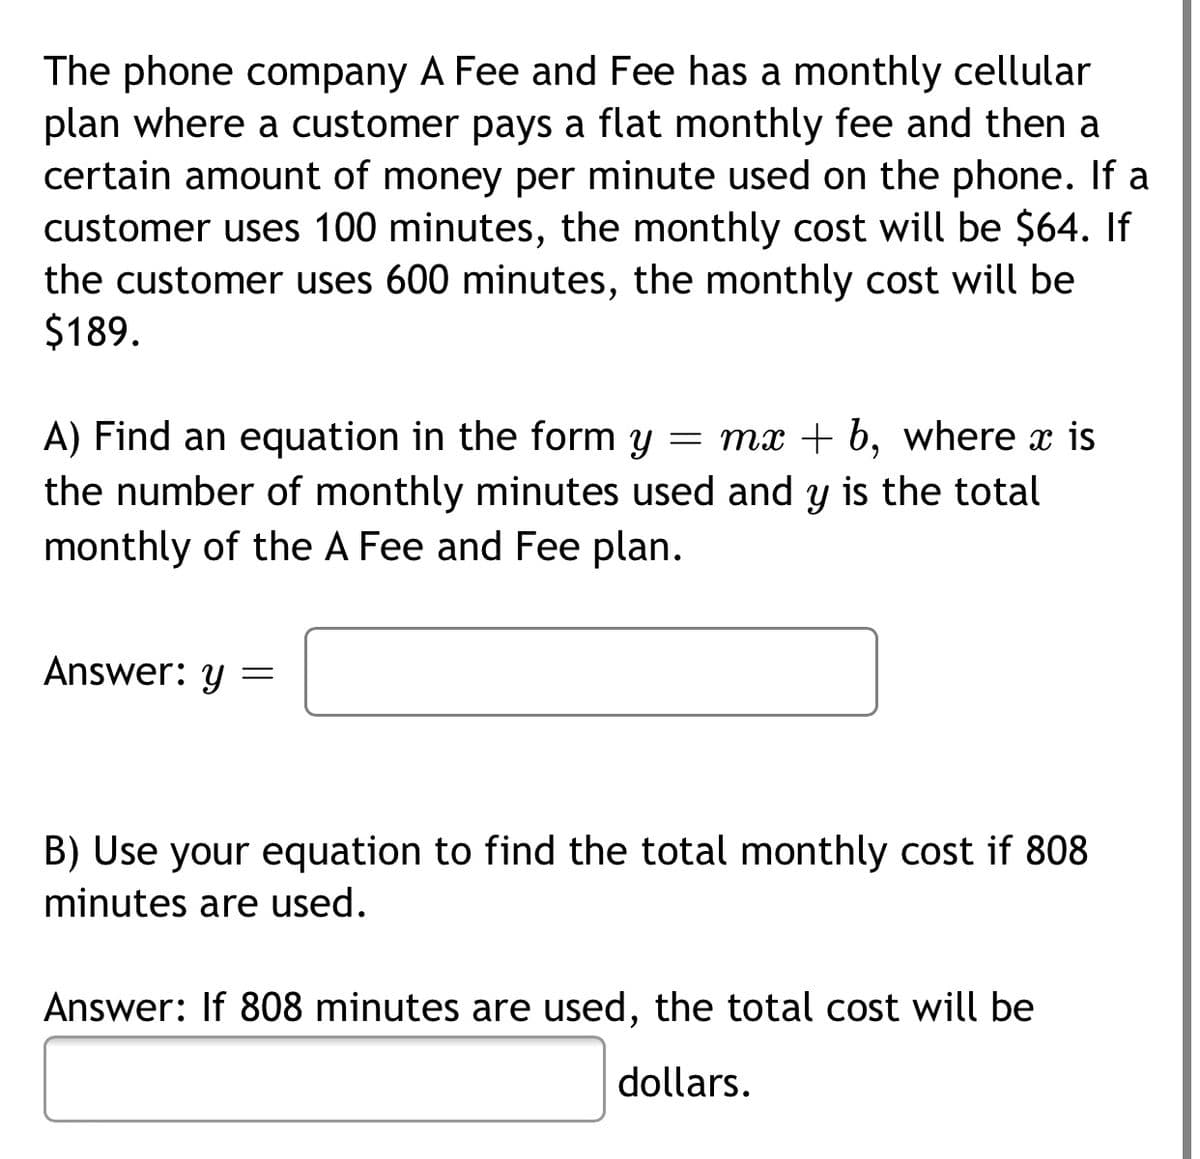 The phone company A Fee and Fee has a monthly cellular
plan where a customer pays a flat monthly fee and then a
certain amount of money per minute used on the phone. If a
customer uses 100 minutes, the monthly cost will be $64. If
the customer uses 600 minutes, the monthly cost will be
$189.
A) Find an equation in the form y = mx + b, where x is
the number of monthly minutes used and y is the total
monthly of the A Fee and Fee plan.
Answer: y =
B) Use your equation to find the total monthly cost if 808
minutes are used.
Answer: If 808 minutes are used, the total cost will be
dollars.
